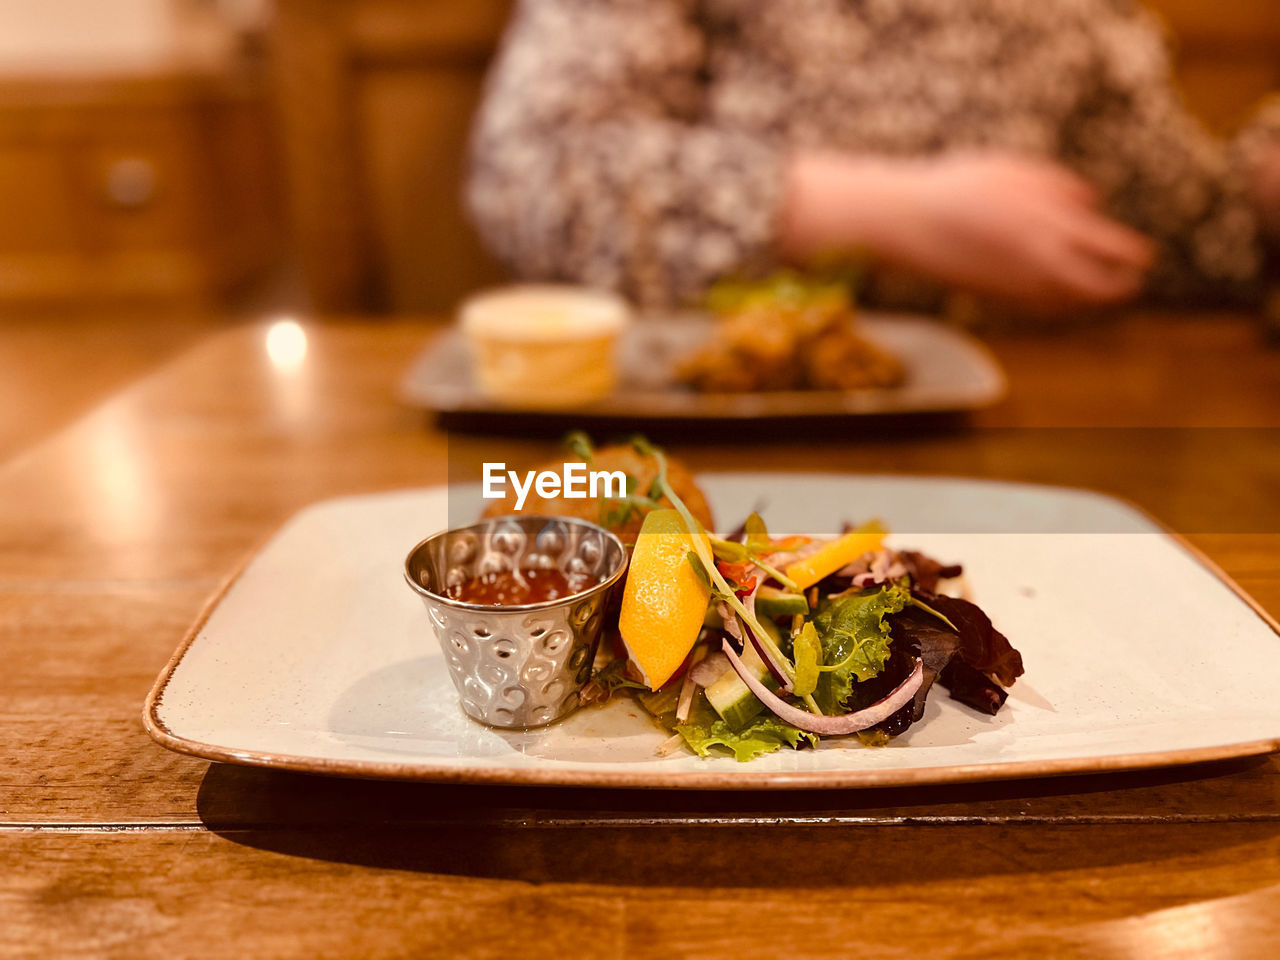 food and drink, food, dinner, meal, dish, plate, table, restaurant, healthy eating, indoors, vegetable, wellbeing, brunch, freshness, produce, focus on foreground, cuisine, supper, breakfast, selective focus, meat, one person, wood, lunch